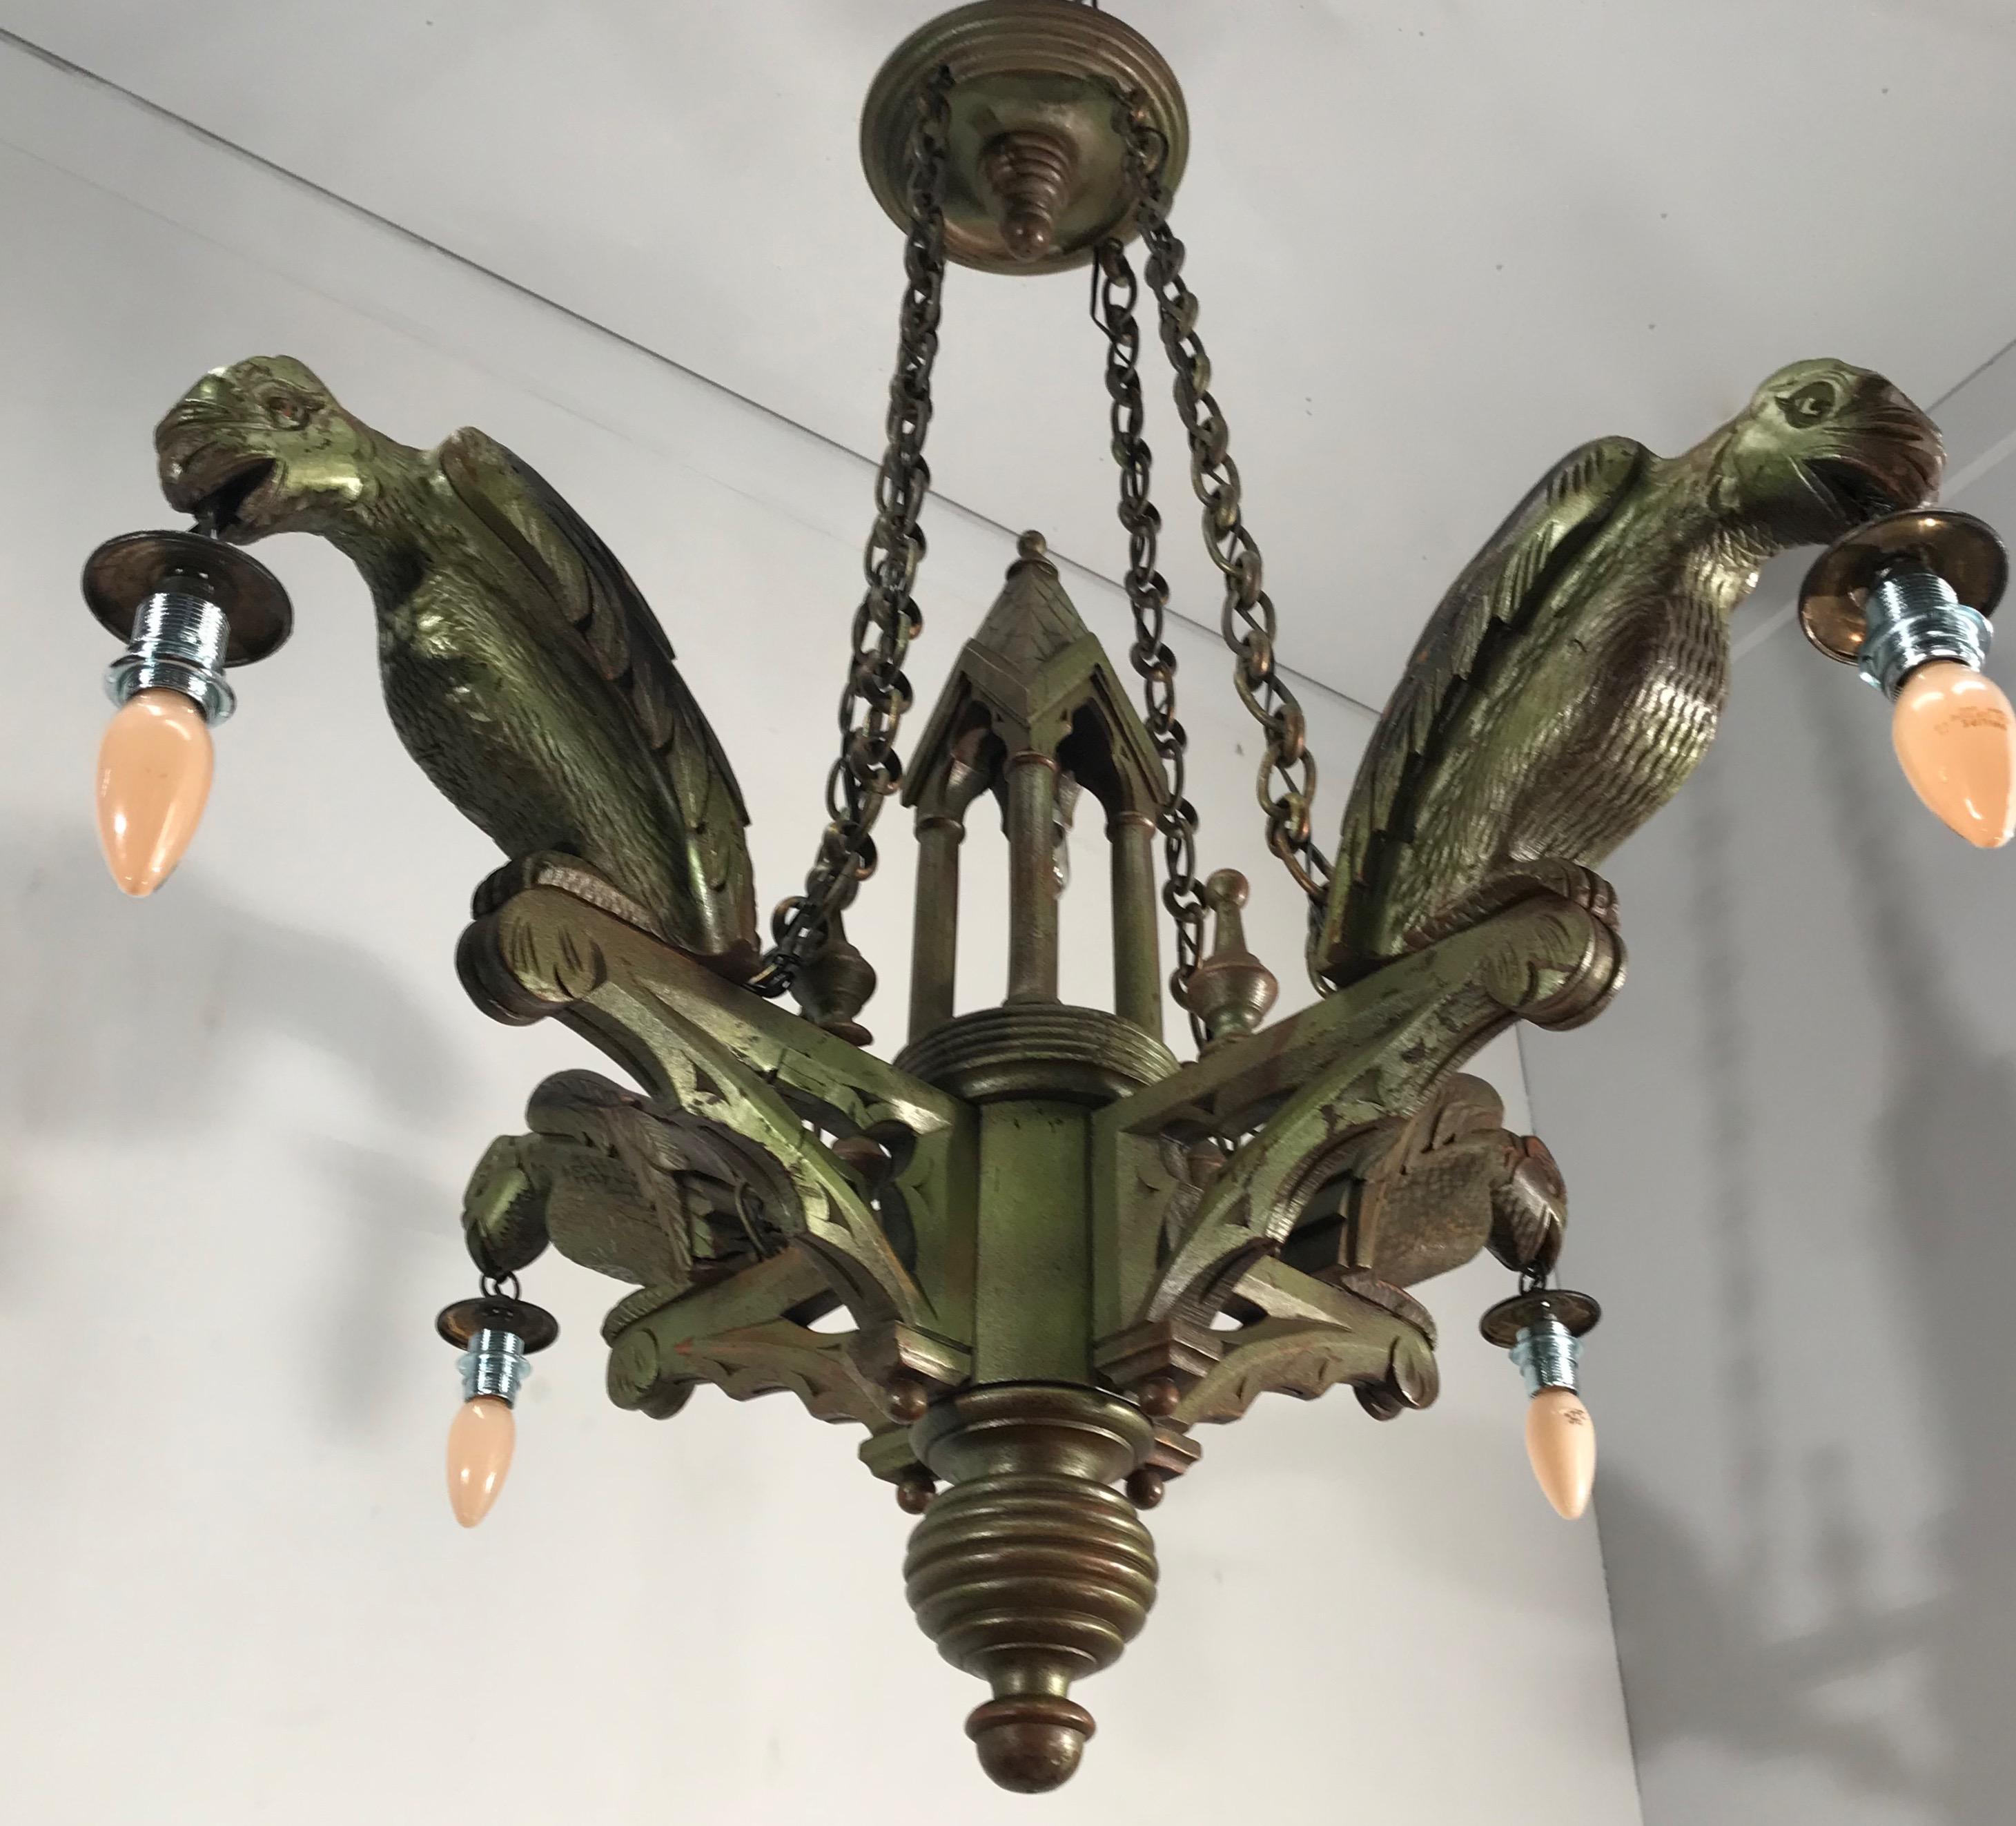 Antique and good size Gothic Revival light fixture. 

If you are looking for an out of the ordinary chandelier then this antique European light fixture in the Gothic style could be perfect for you. All hand carved out of solid wood and metalized